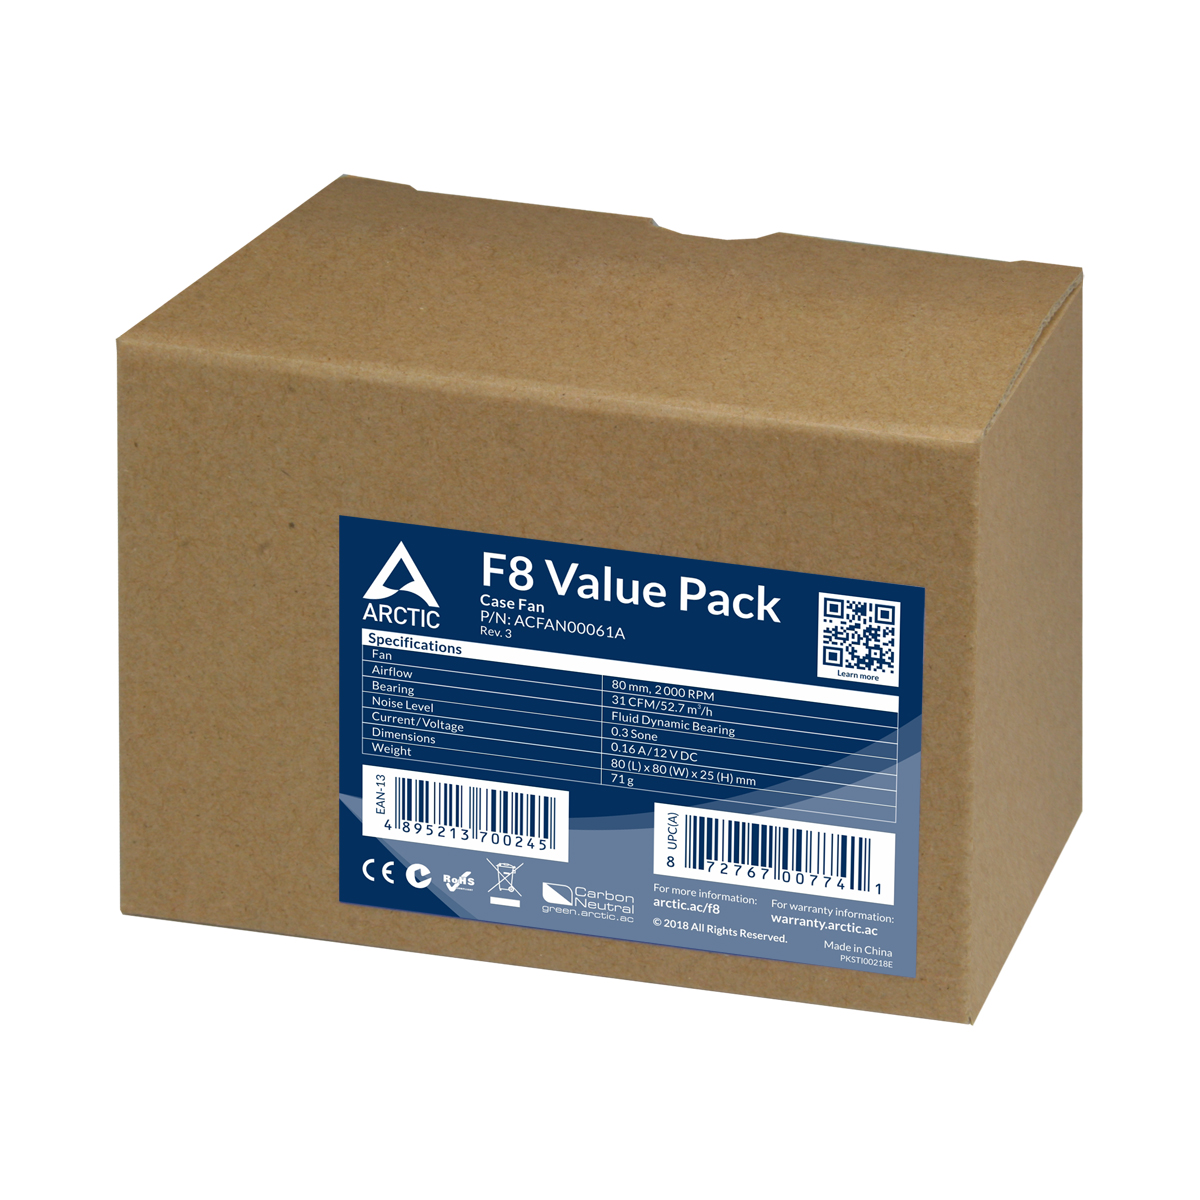 F8_Value_Pack_G02